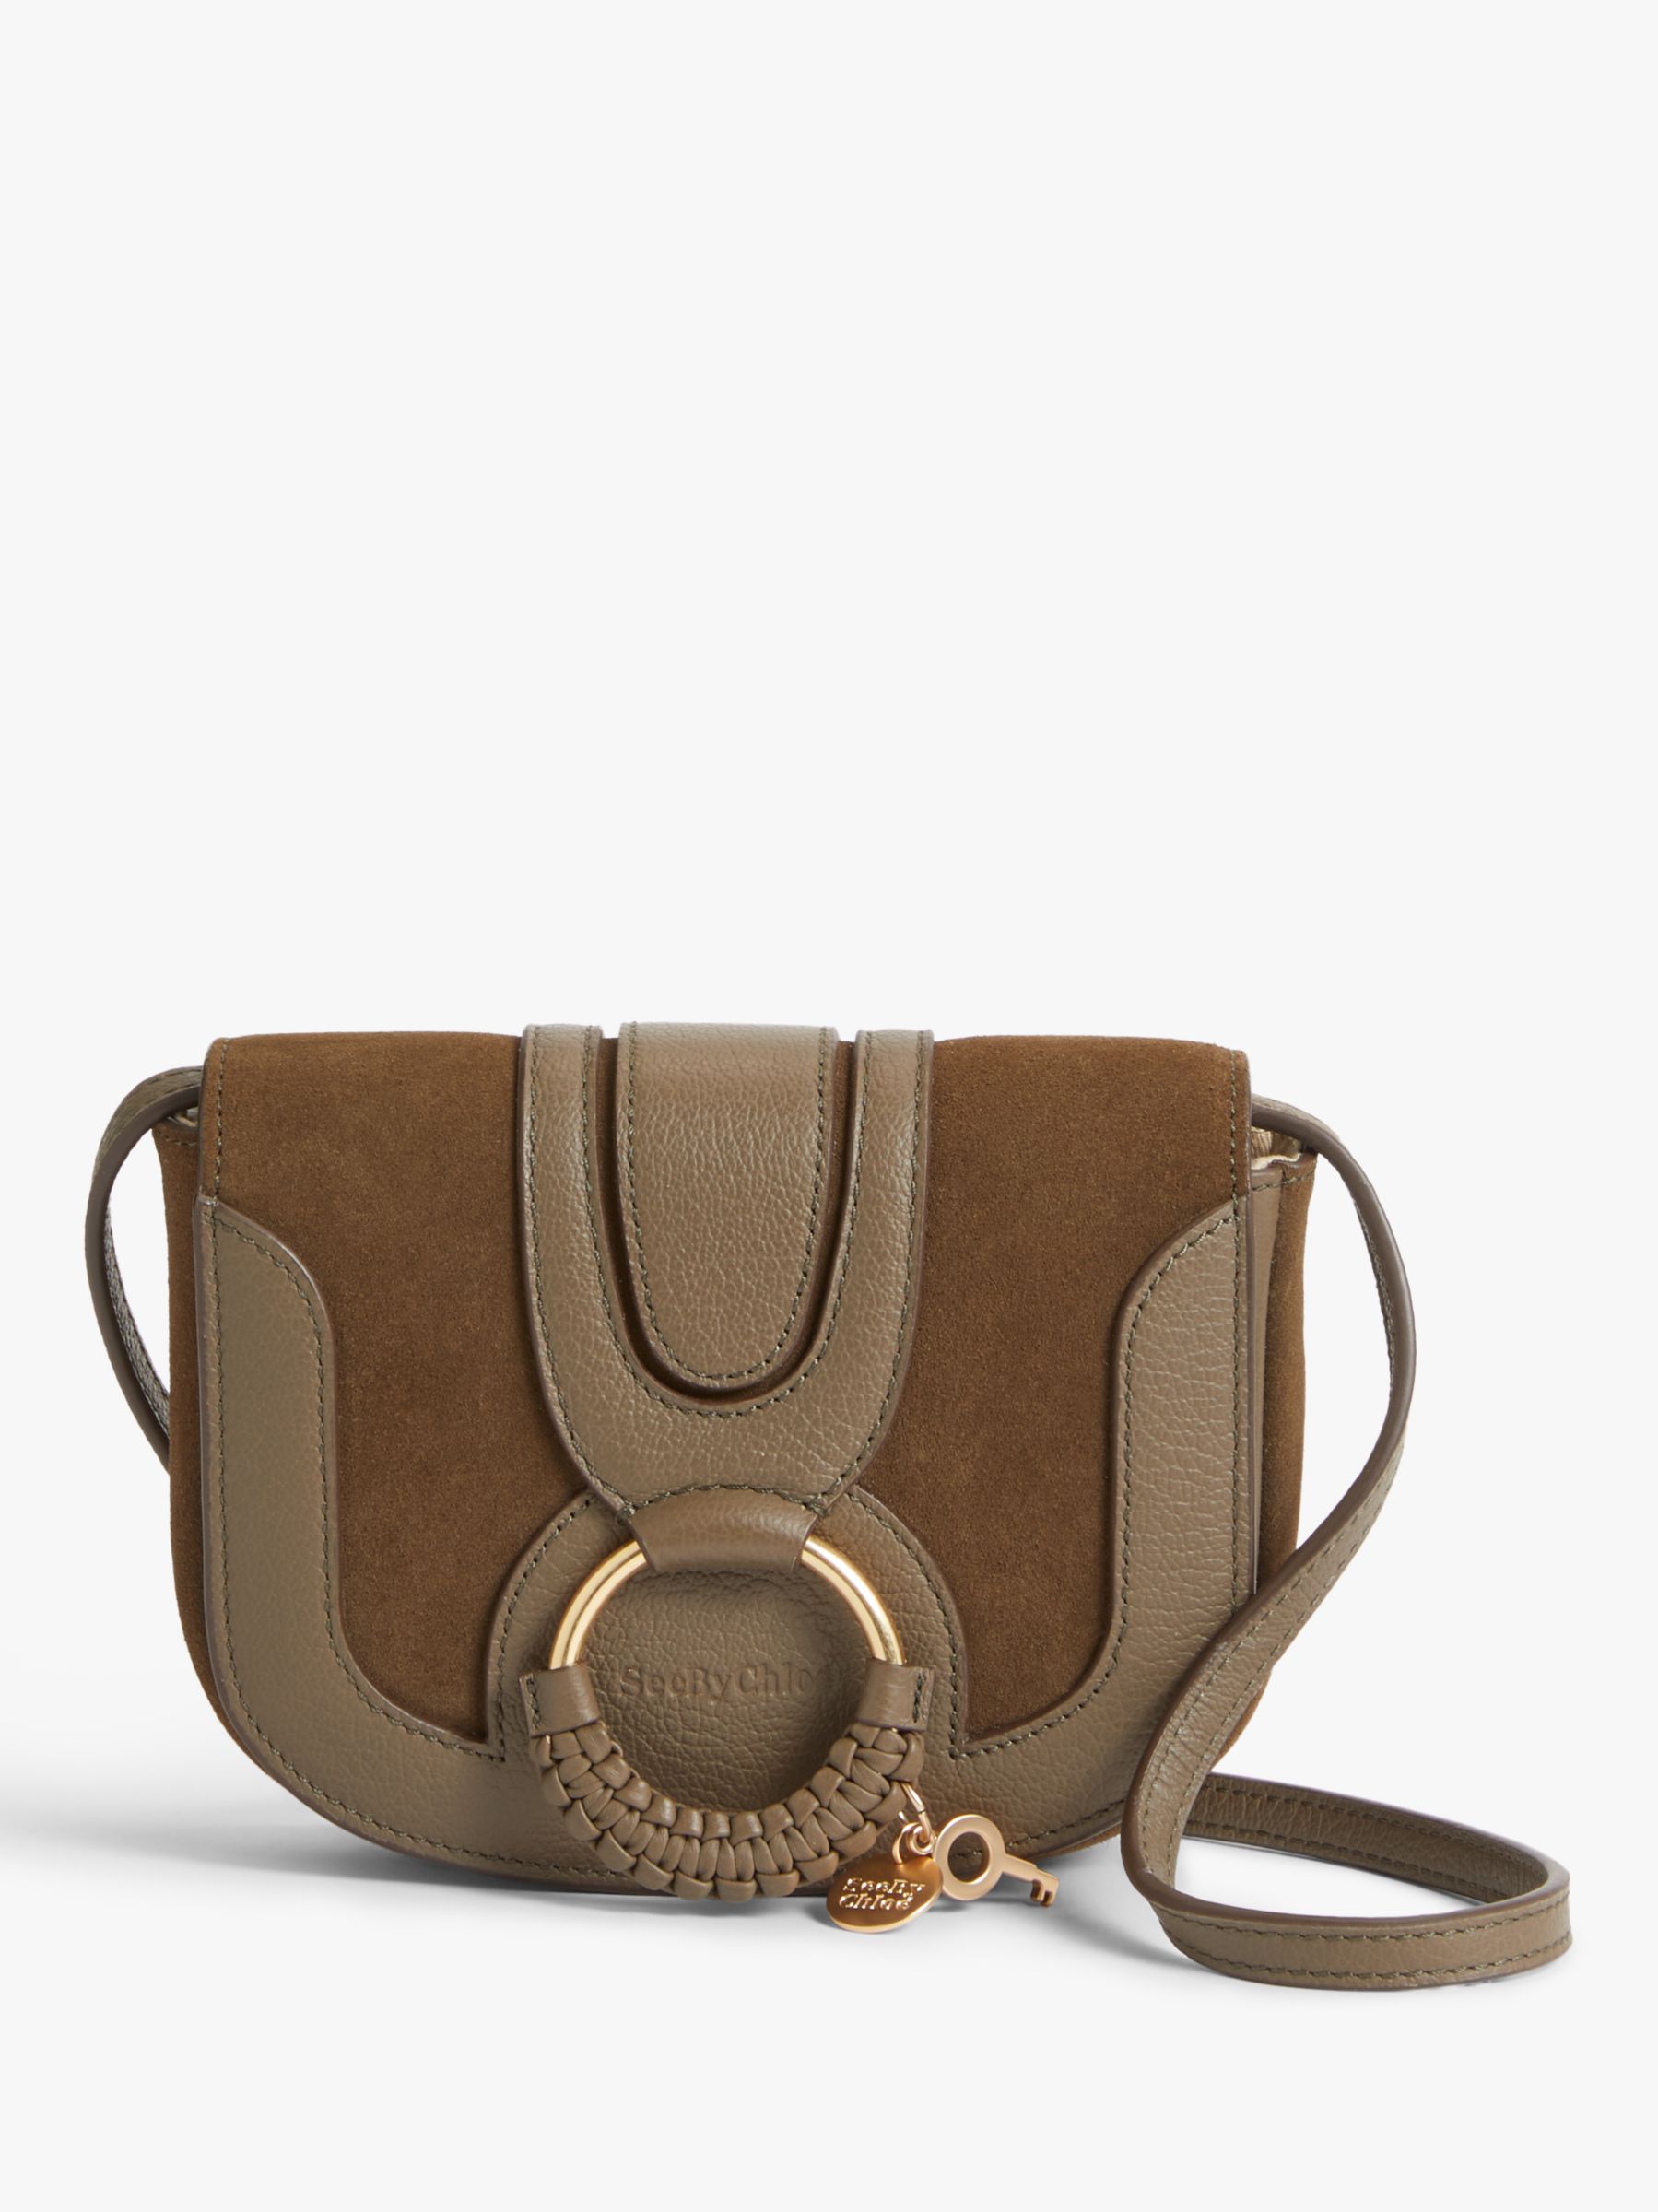 See By Chloé Mini Hana Suede Leather Satchel Bag, Moss at John Lewis ...